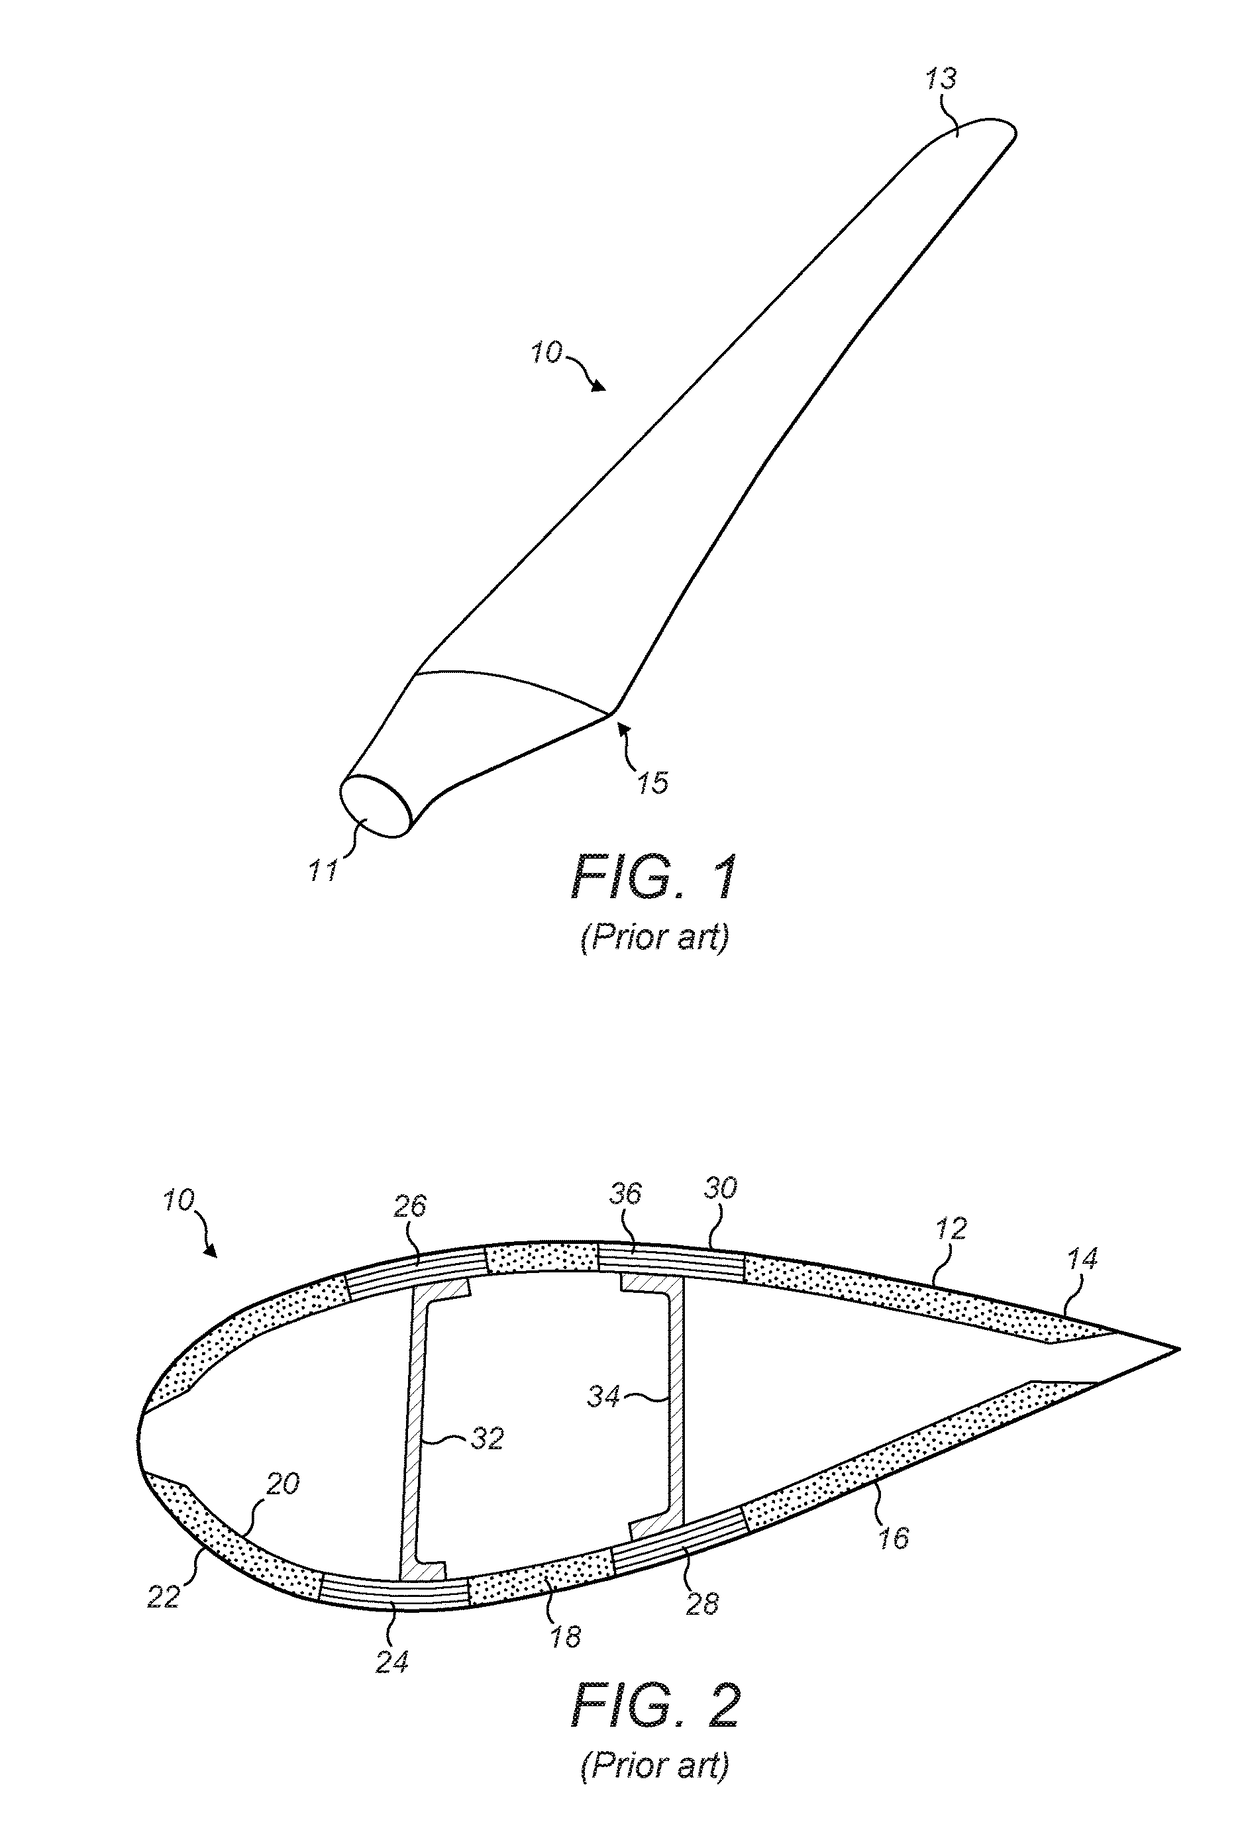 Composite component having a safety edge